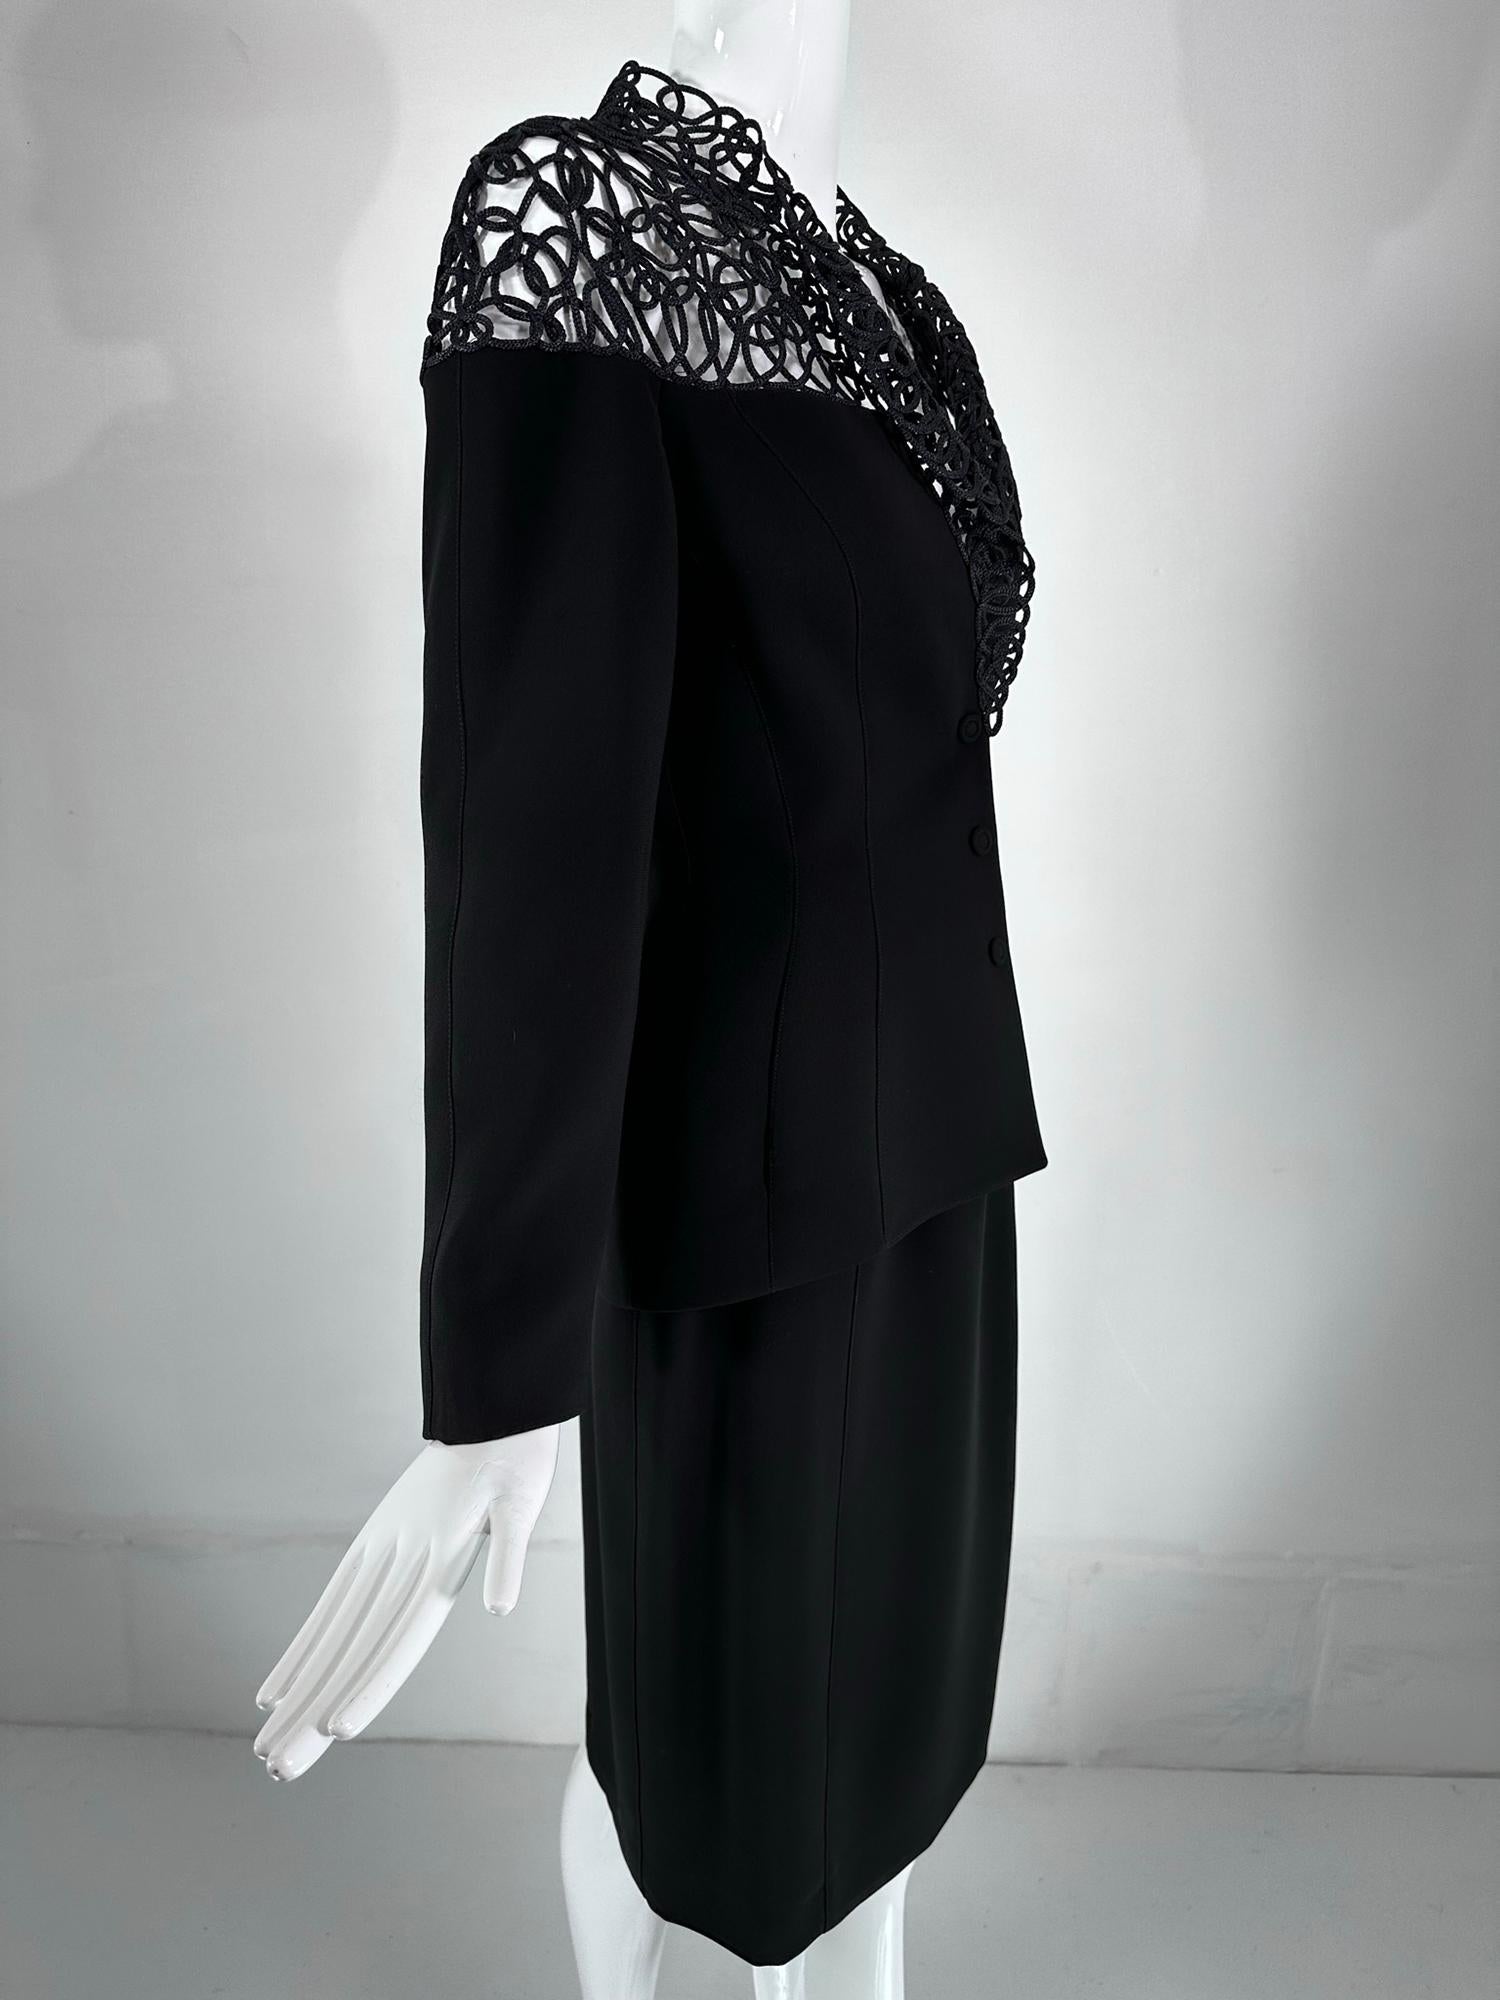 Thierry Mugler Black cord lace jacket & matching skirt from the 1980s, looks barely, if ever, worn. Fitted jacket features black cord open work lace at the collar & lapels plus the shoulders front & back. The jacket is fine black wool gabardine. The